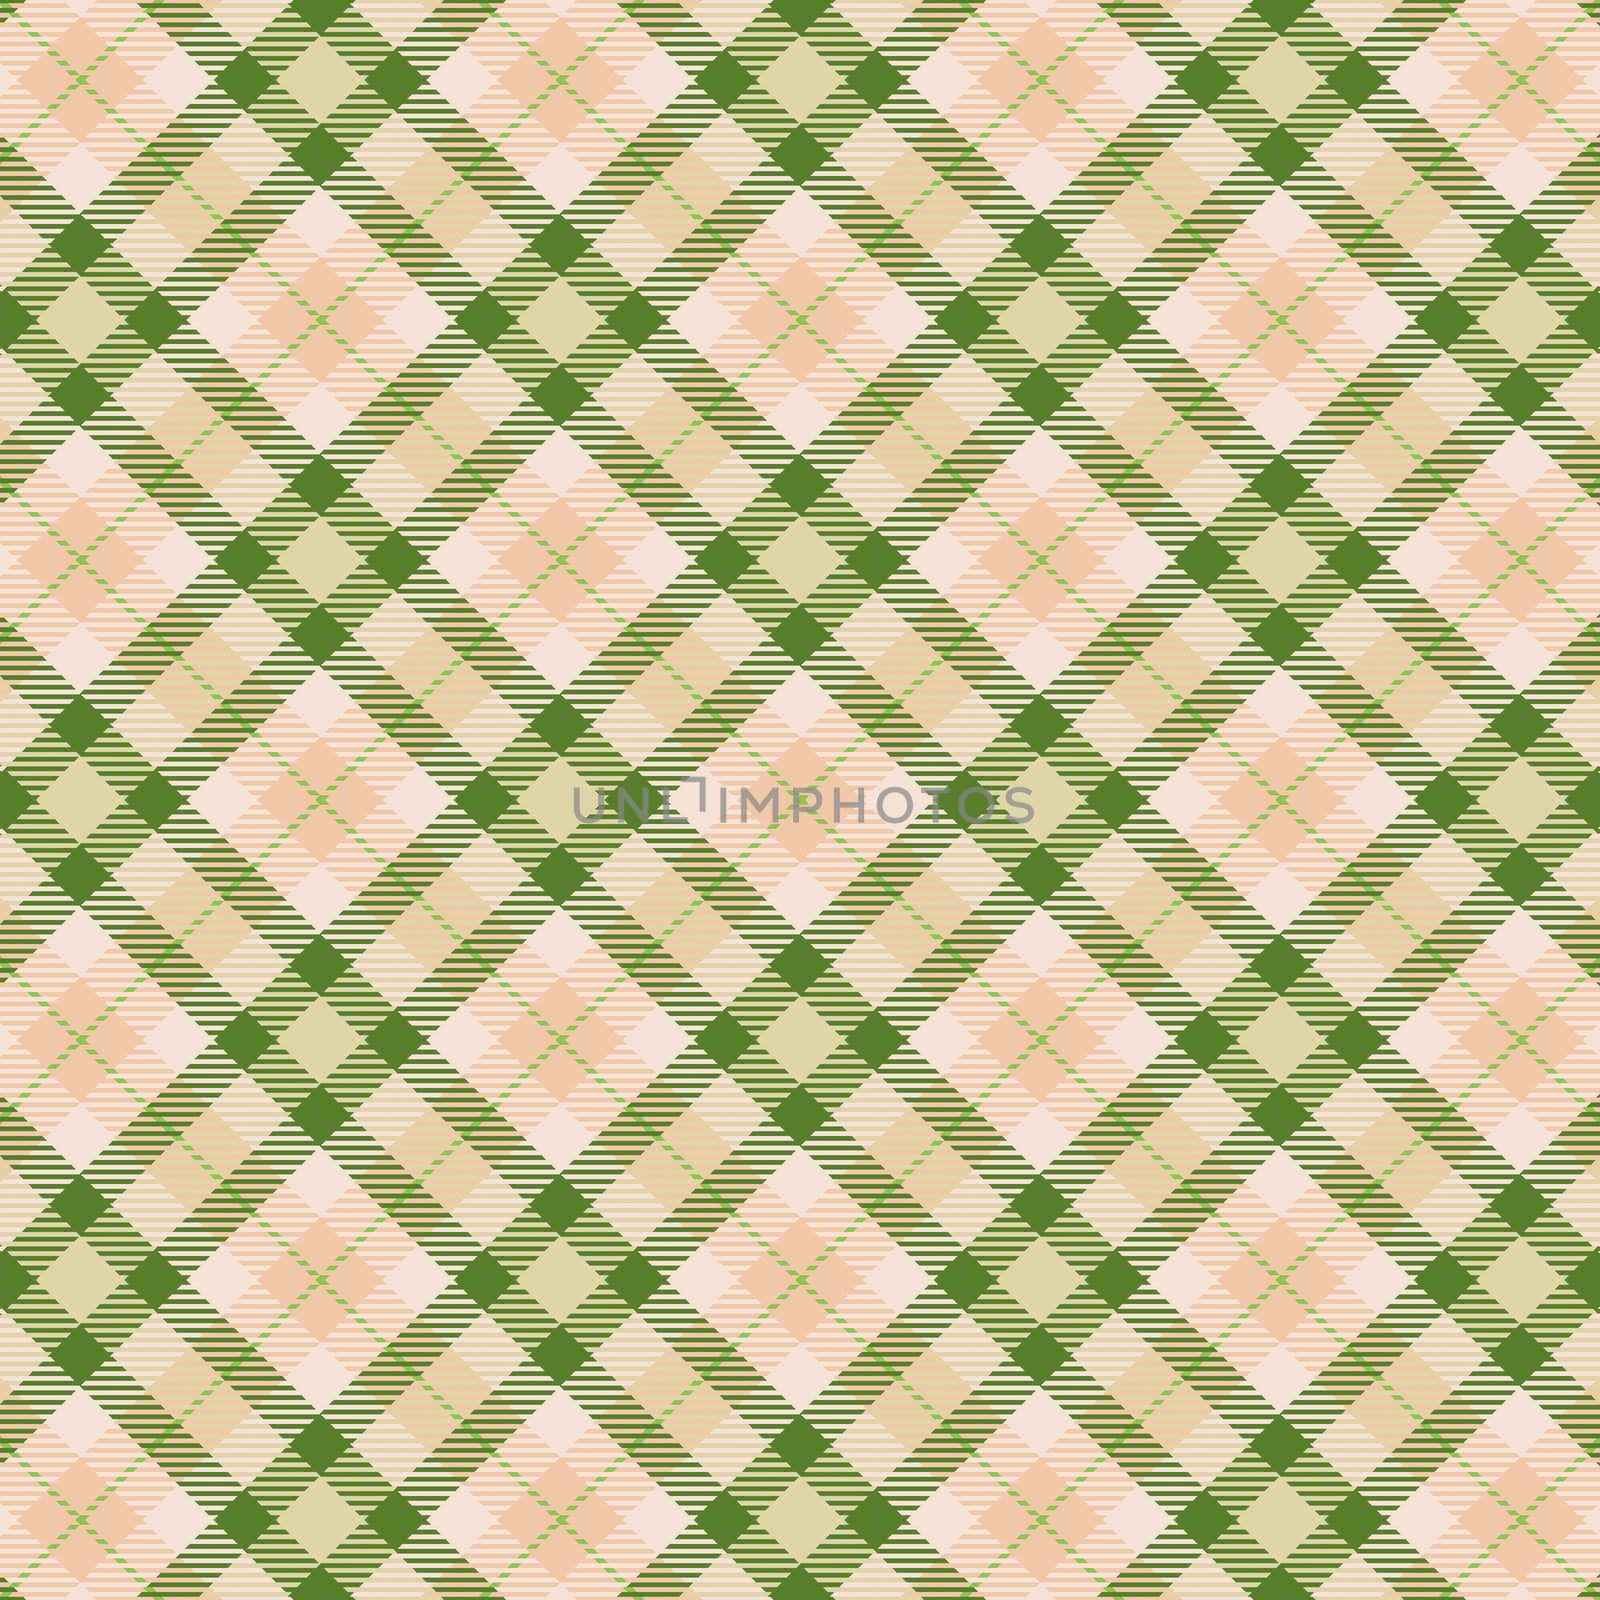 An image of a seamless fabric background